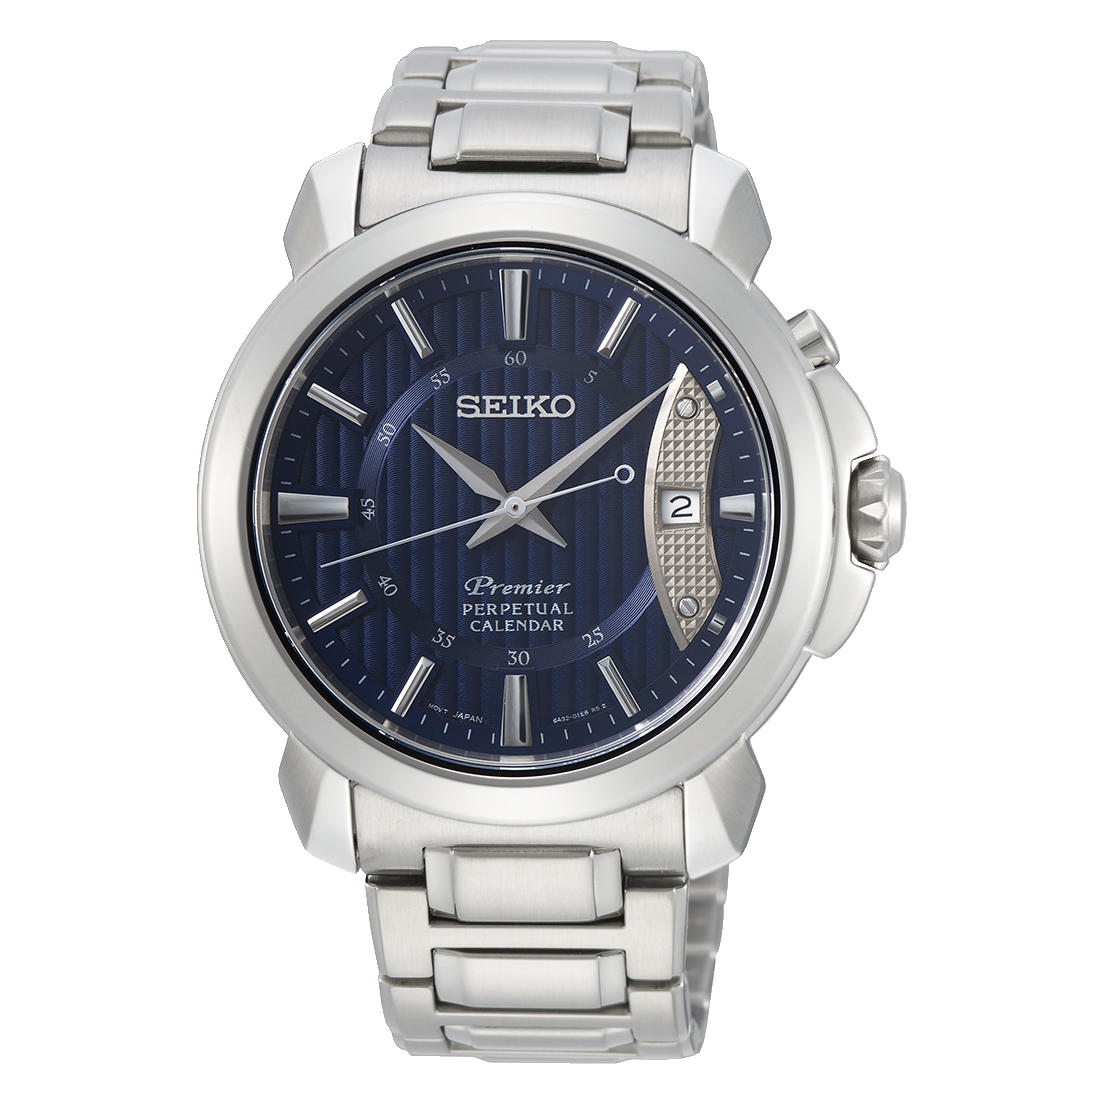 SEIKO PREMIER MEN PERPETUAL CALENDAR QUARTZ STAINLESS STEEL WATCH SNQ157P1  – SHIN HING TIME I Buy Watches Online Malaysia I Physical Watch Shop